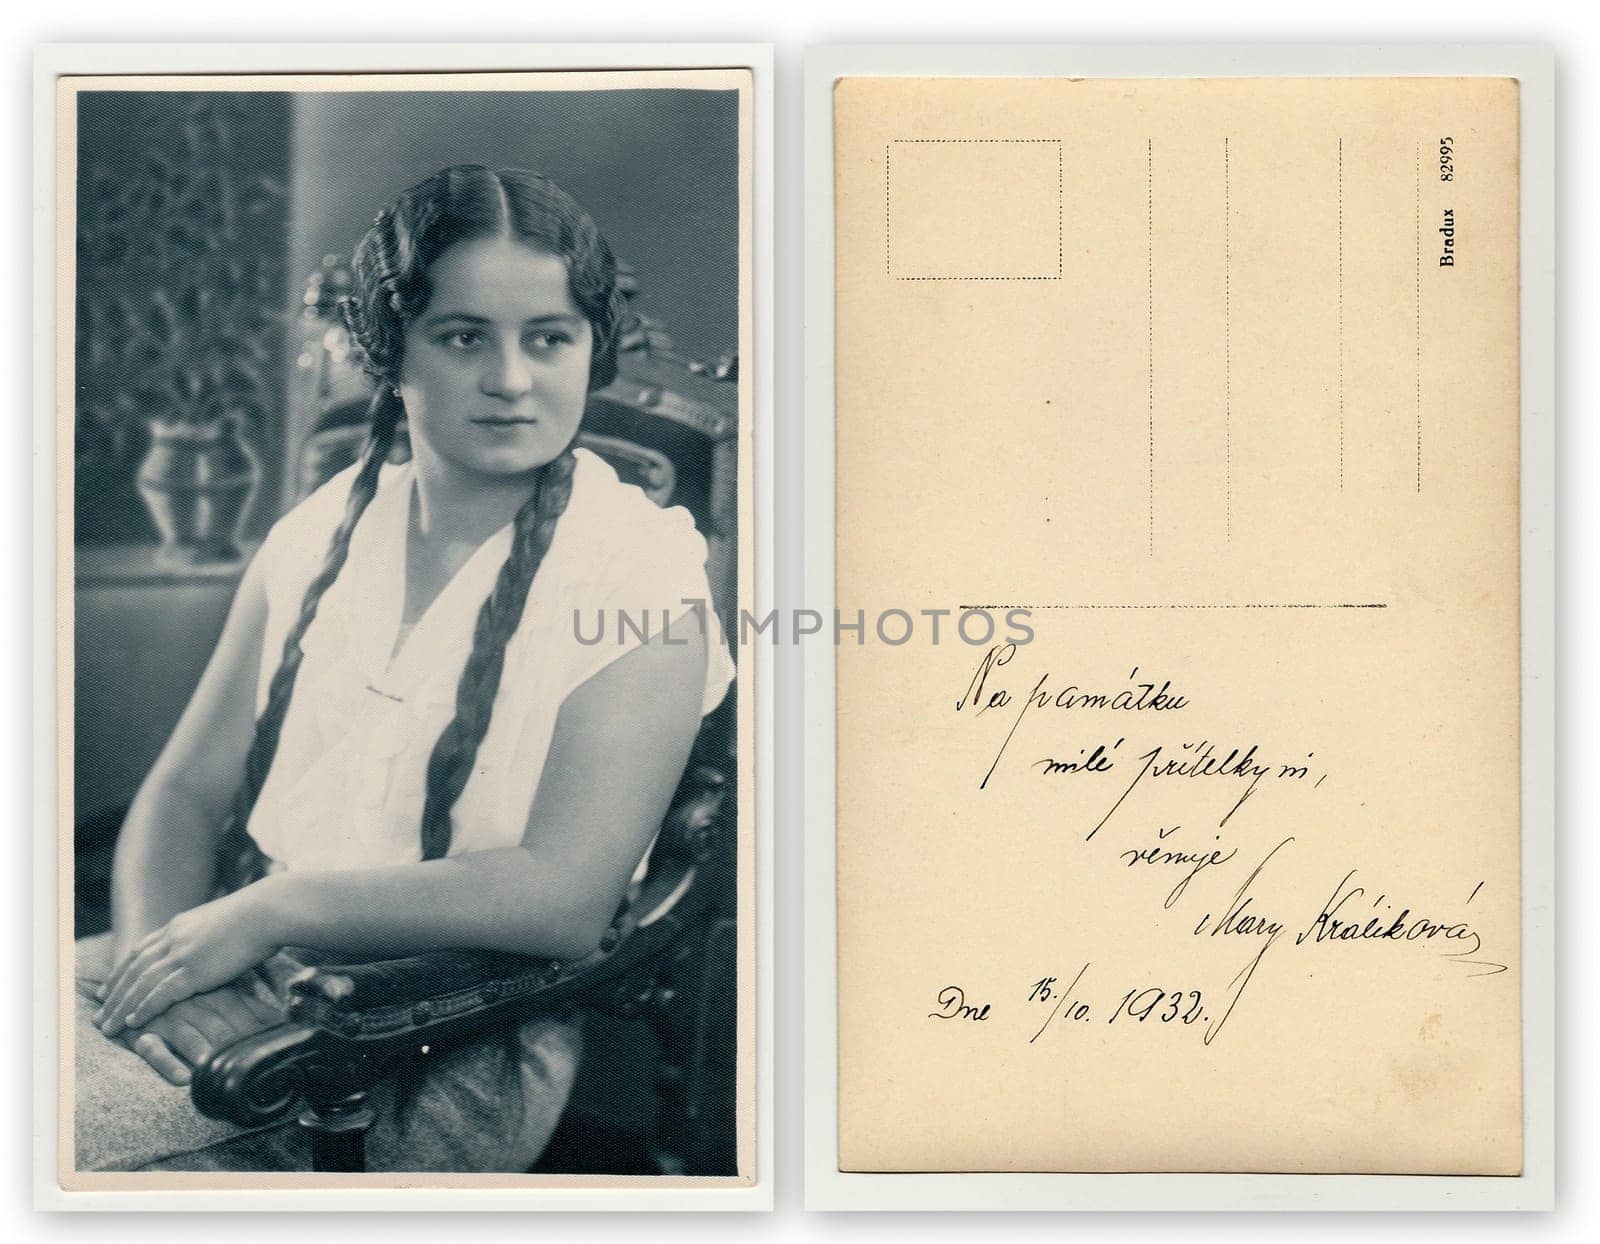 THE CZECHOSLOVAK REPUBLIC, OCTOBER 15, 1932: Front and back of vintage photo. Vintage portrait photo shows girl sits on a chair. Photo studio portrait, October 15, 1932.